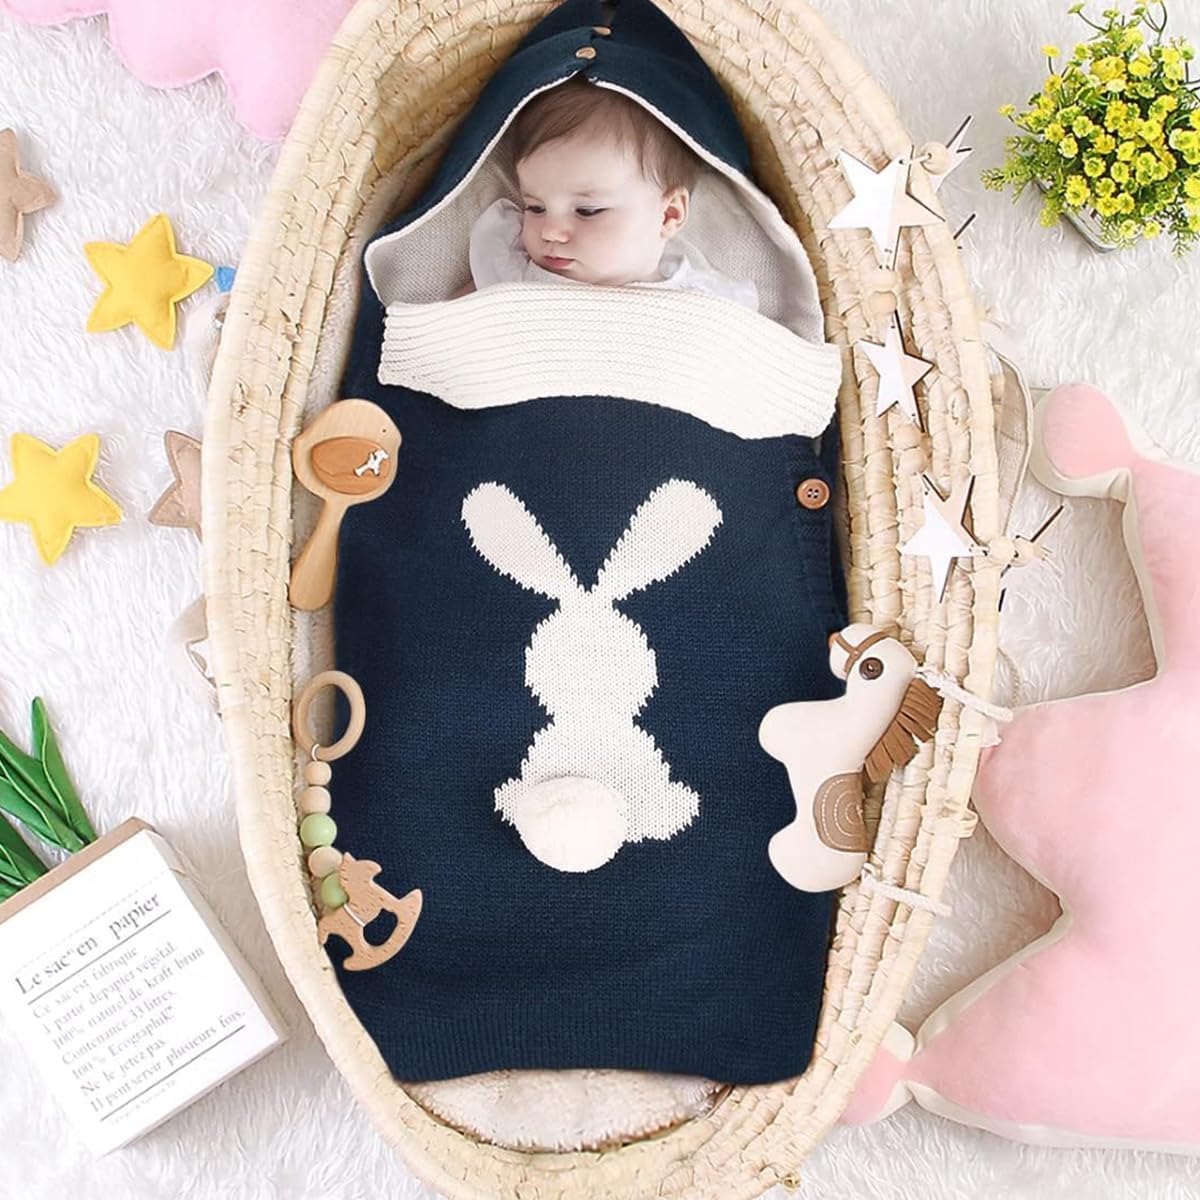 LinJie Baby Swaddle Wrap,Baby Knitting Sleeping Bag,Baby Swaddle Blanket，Stroller Sleeping Bag Refer To 0-12 Months Girls Or Boys.